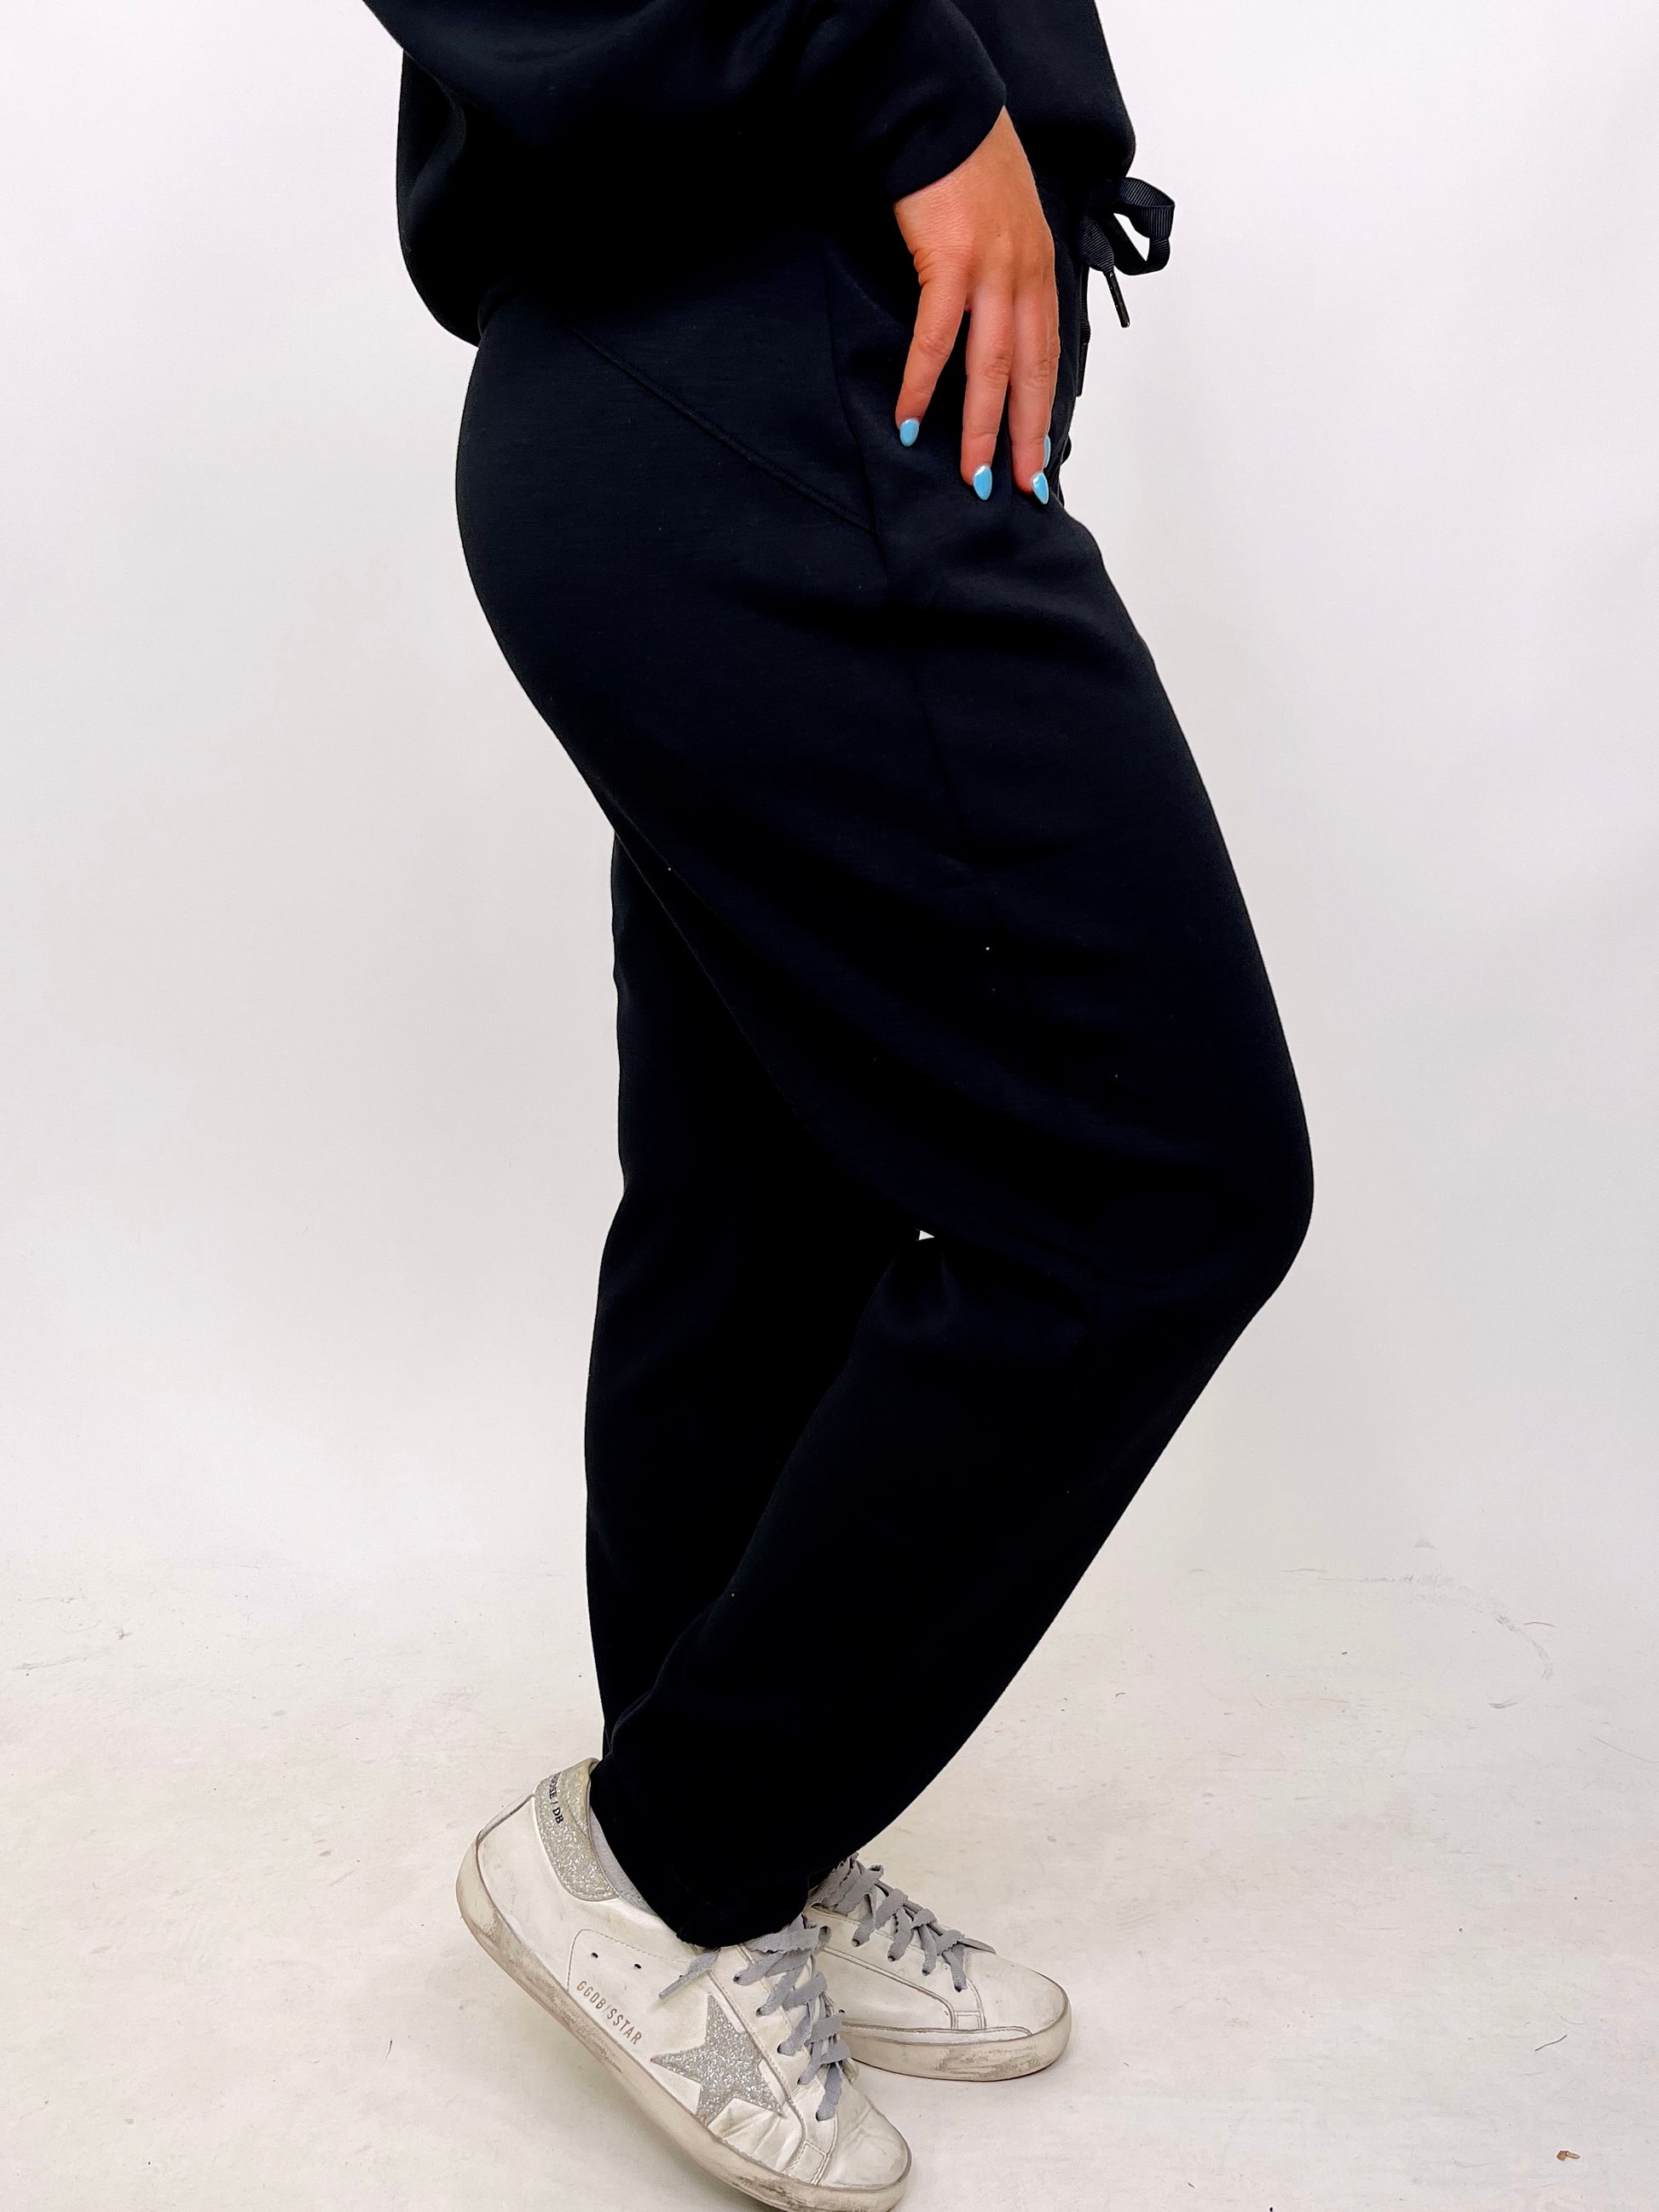 Spanx AirEssentials Tapered Pant-Lounge Pants-Spanx-The Village Shoppe, Women’s Fashion Boutique, Shop Online and In Store - Located in Muscle Shoals, AL.